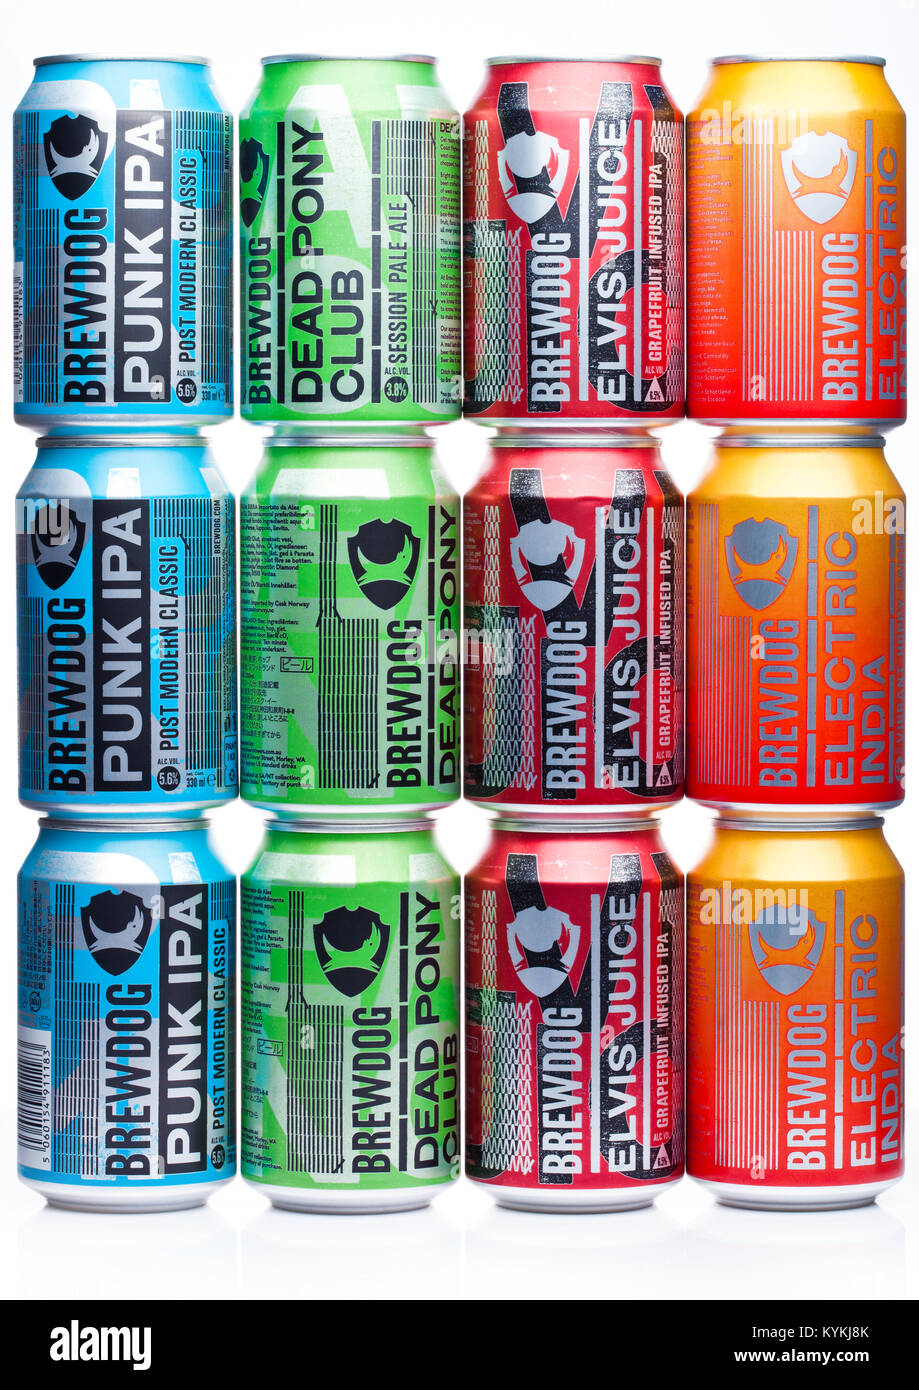 LONDON, UK - JANUARY 02, 2018: Aluminium cans of Brewdog  beer selection, from the Brewdog brewery on white background. Stock Photo